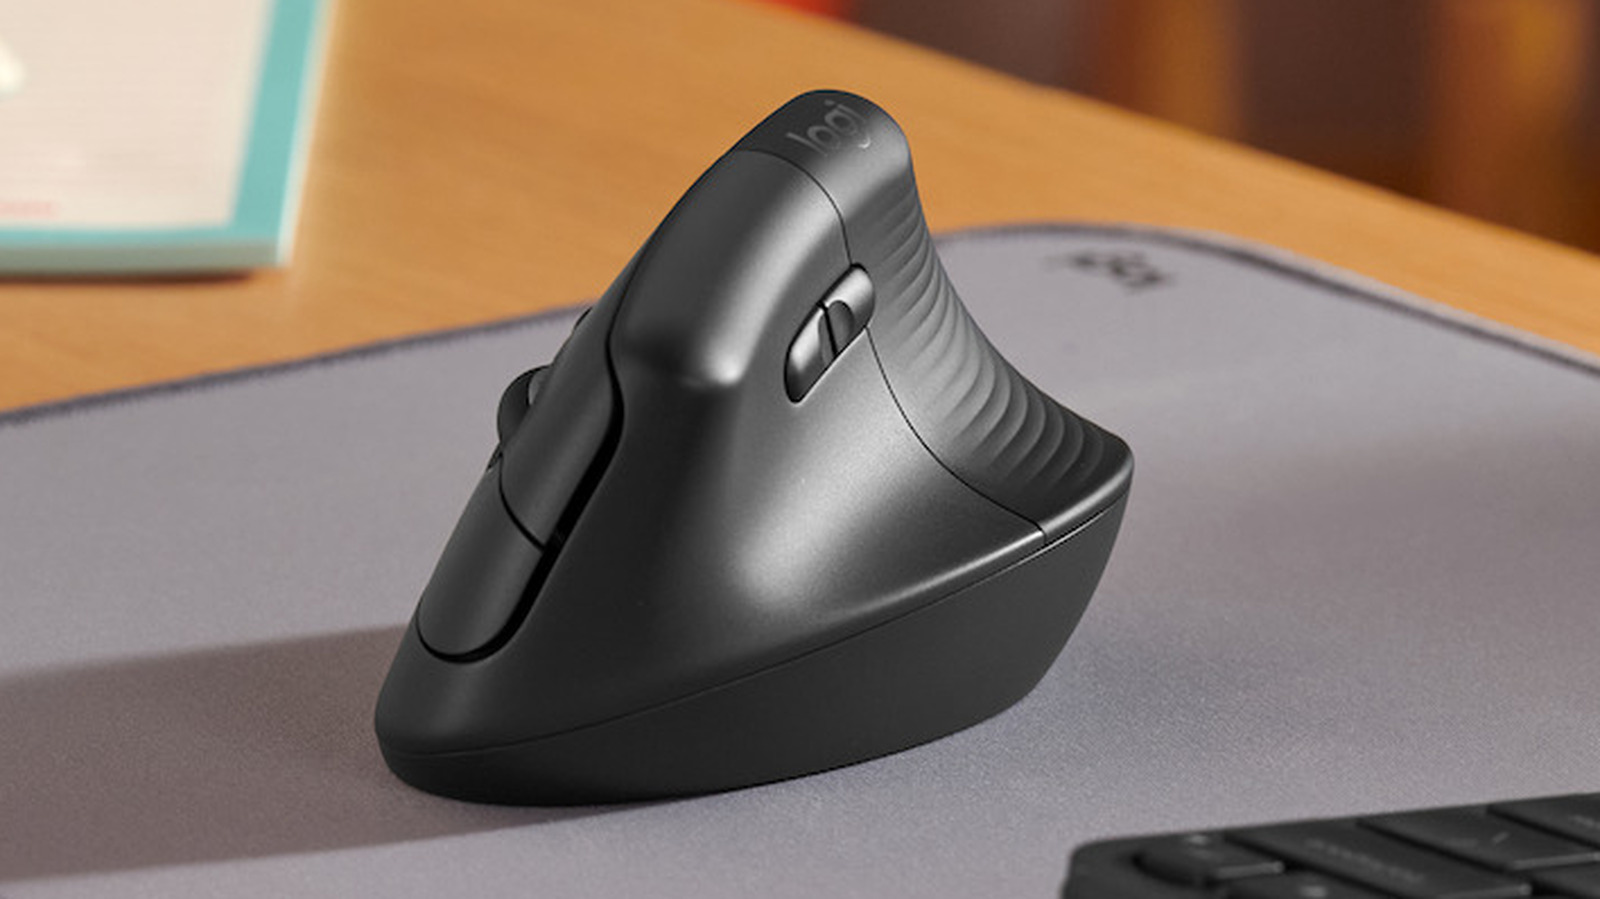 logitech-lift-vertical-is-an-ergonomic-mouse-for-the-rest-of-us